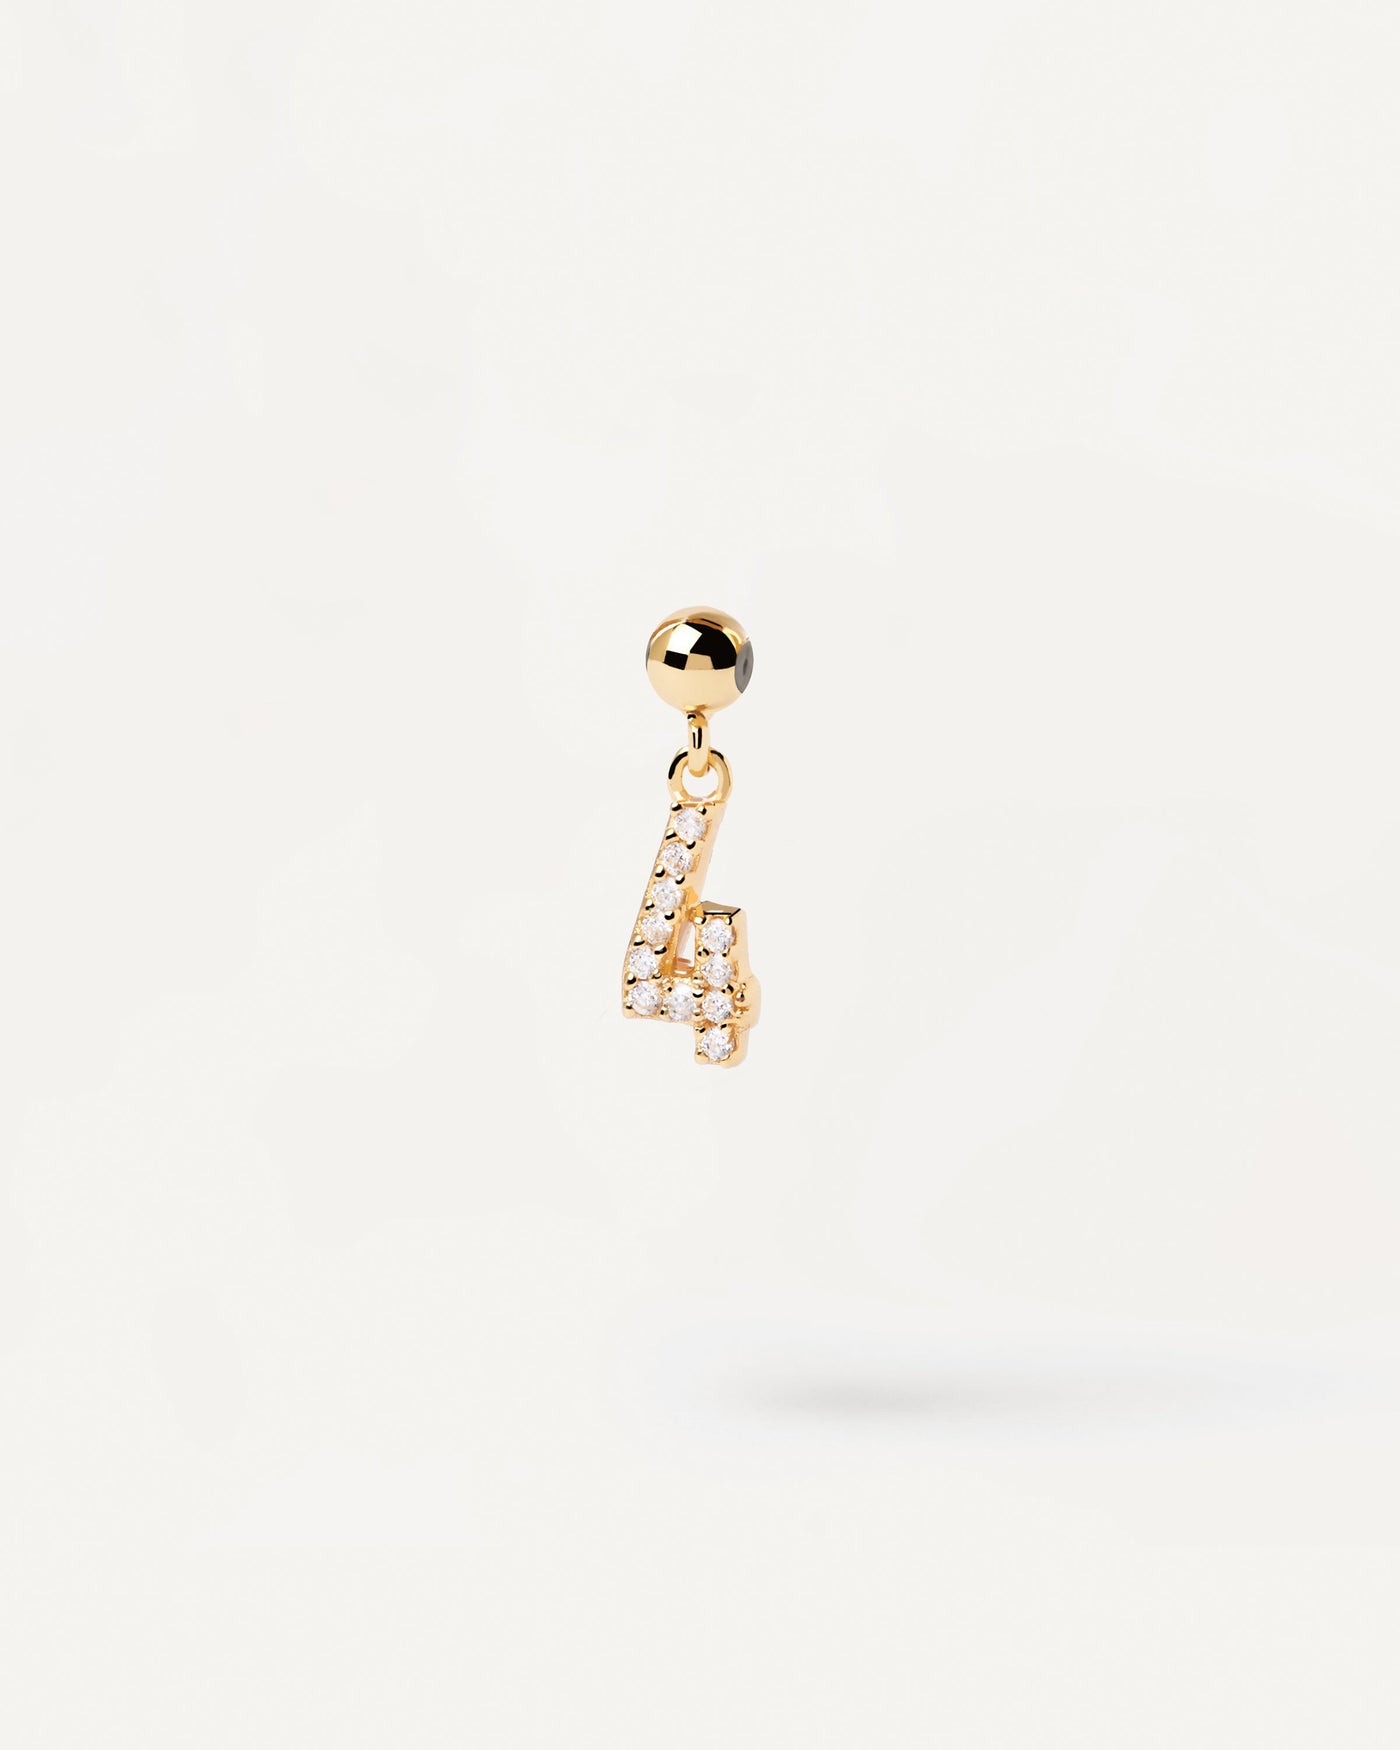 2023 Selection | Number 4 Charm. Gold-plated silver 4 number for Charm necklace or bracelet with white zirconia. Get the latest arrival from PDPAOLA. Place your order safely and get this Best Seller. Free Shipping.